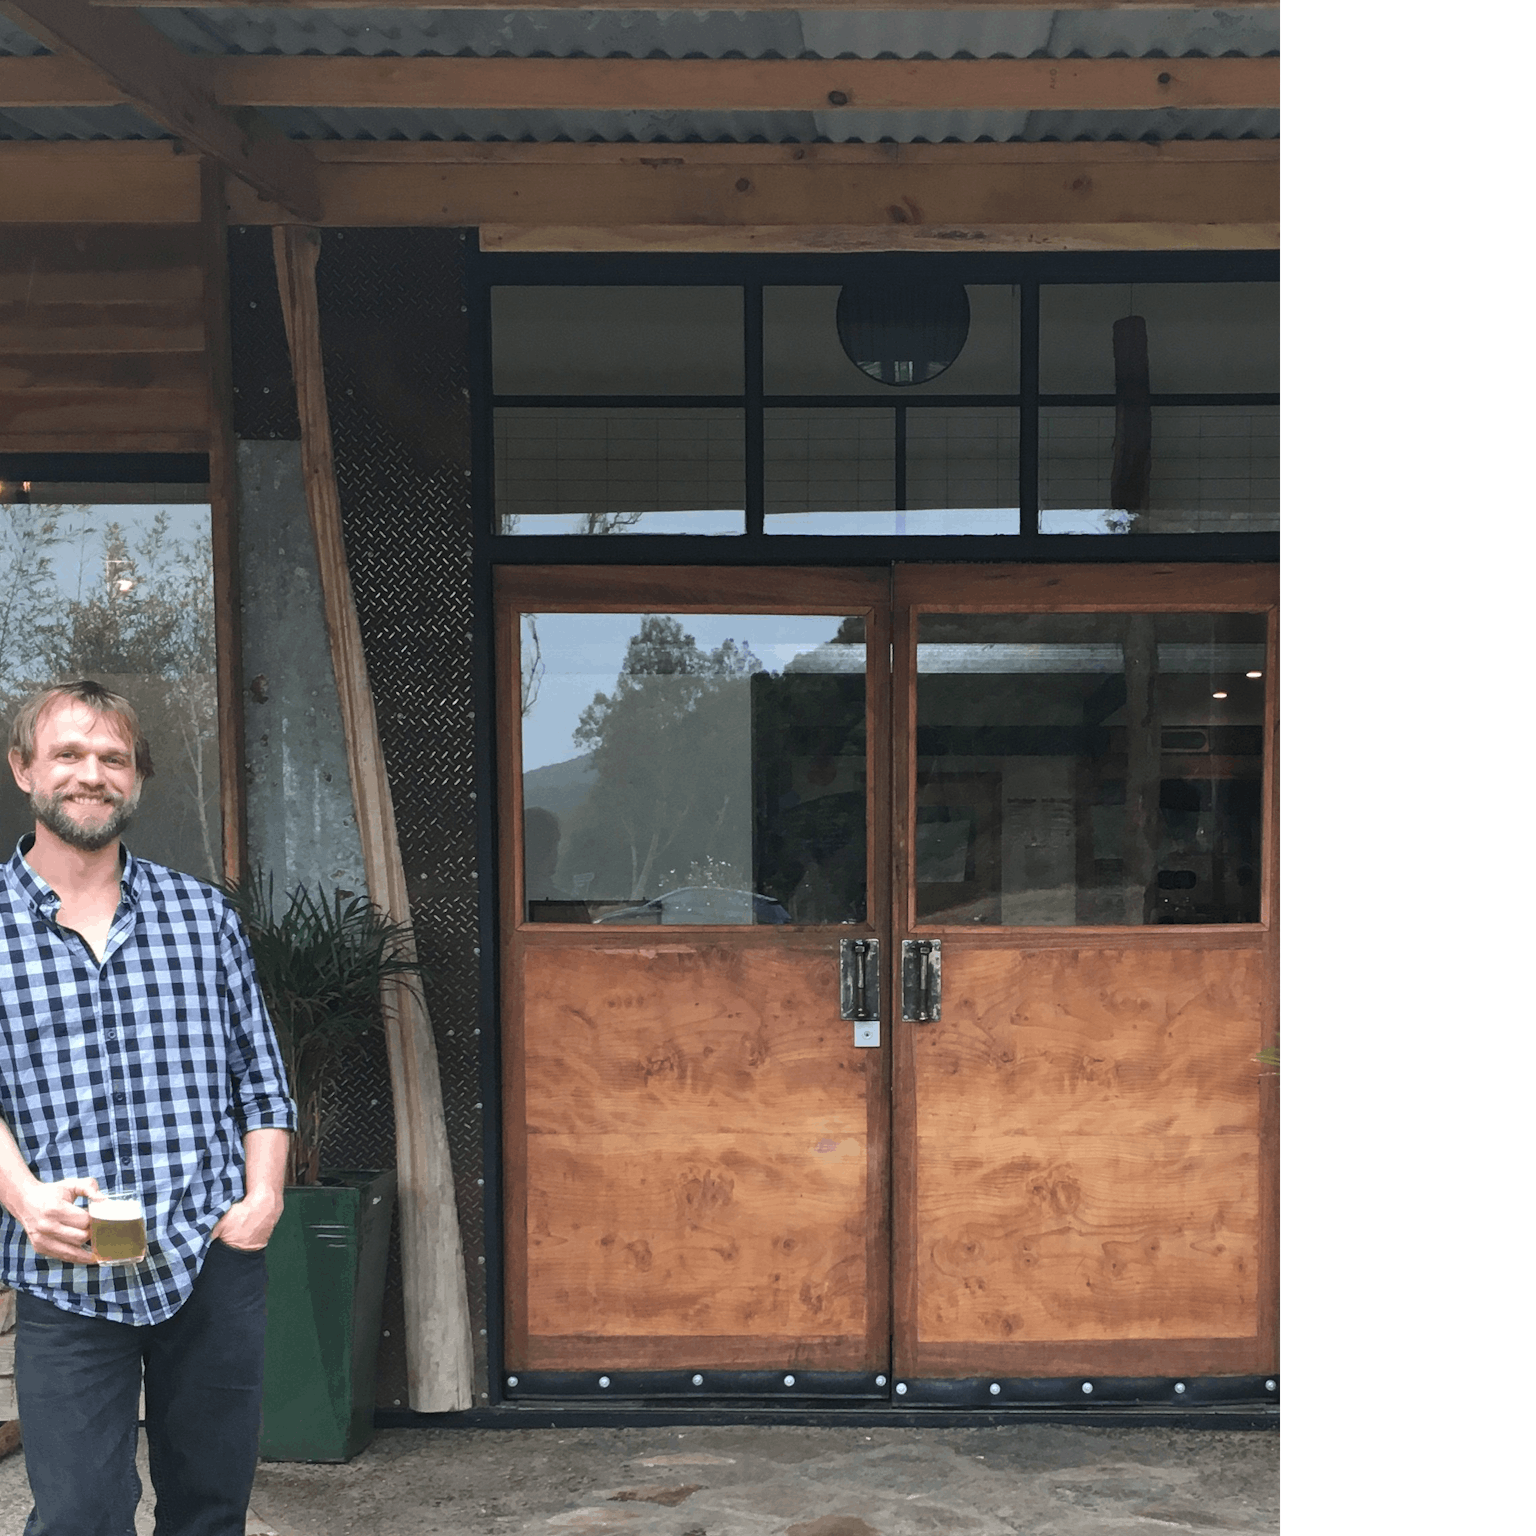 Mitta Mitta Brewing Co owners Tim and Alec